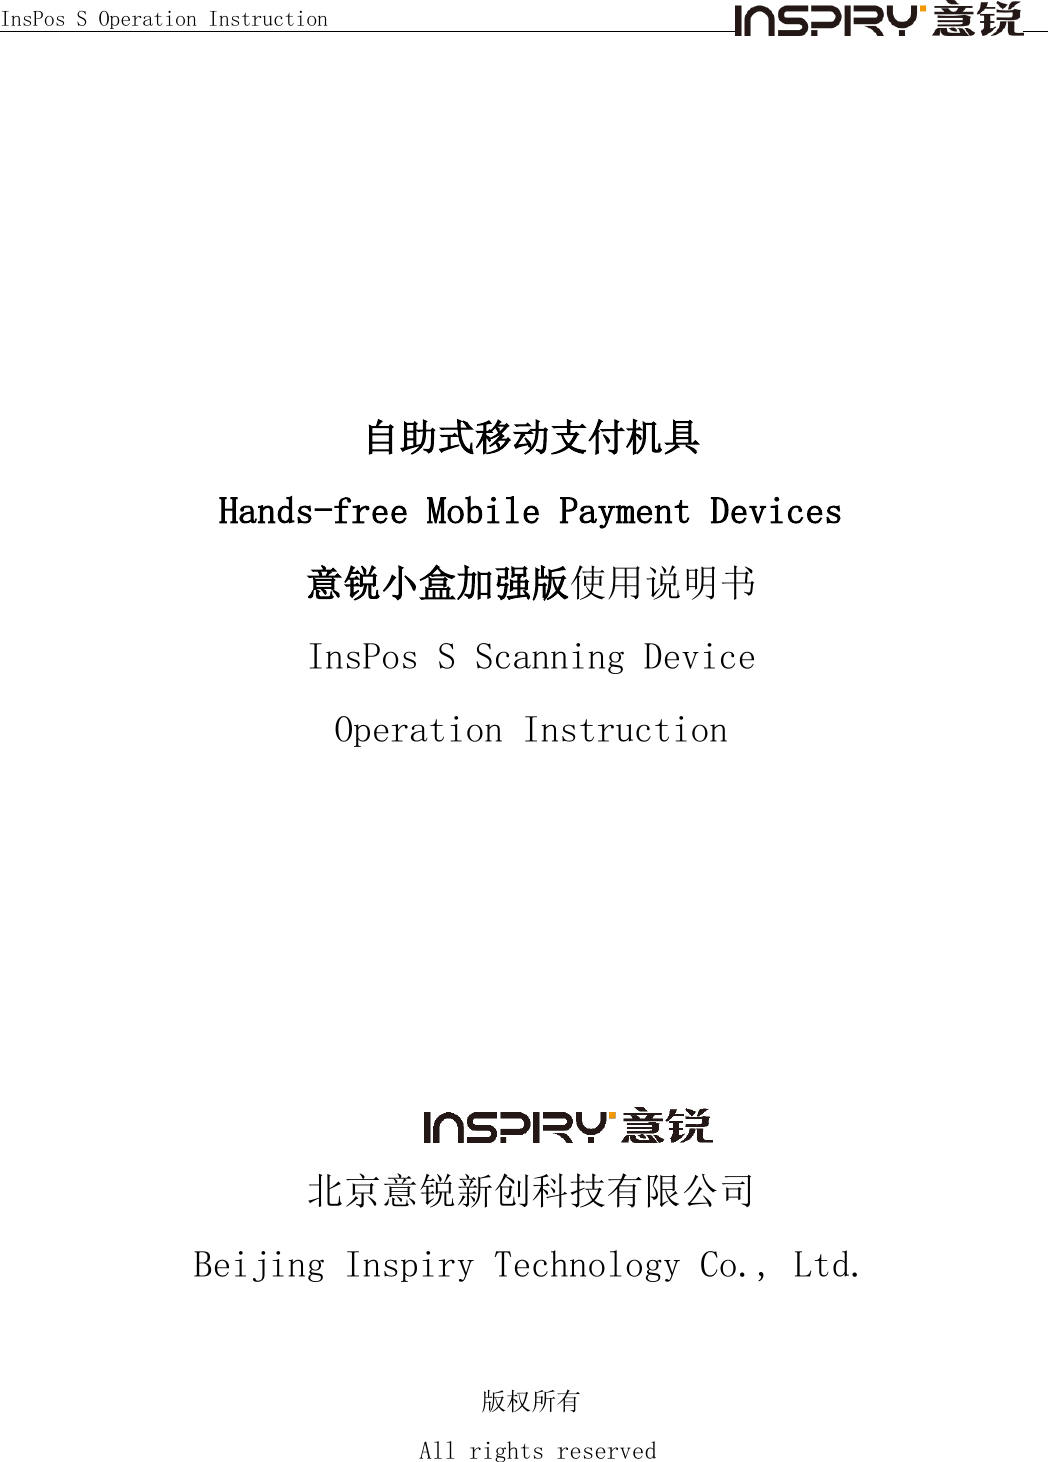 InsPos S Operation Instruction                                                 自助式移动支付机具 Hands-free Mobile Payment Devices 意锐小盒加强版使用说明书 InsPos S Scanning Device  Operation Instruction        北京意锐新创科技有限公司 Beijing Inspiry Technology Co., Ltd.  版权所有 All rights reserved  